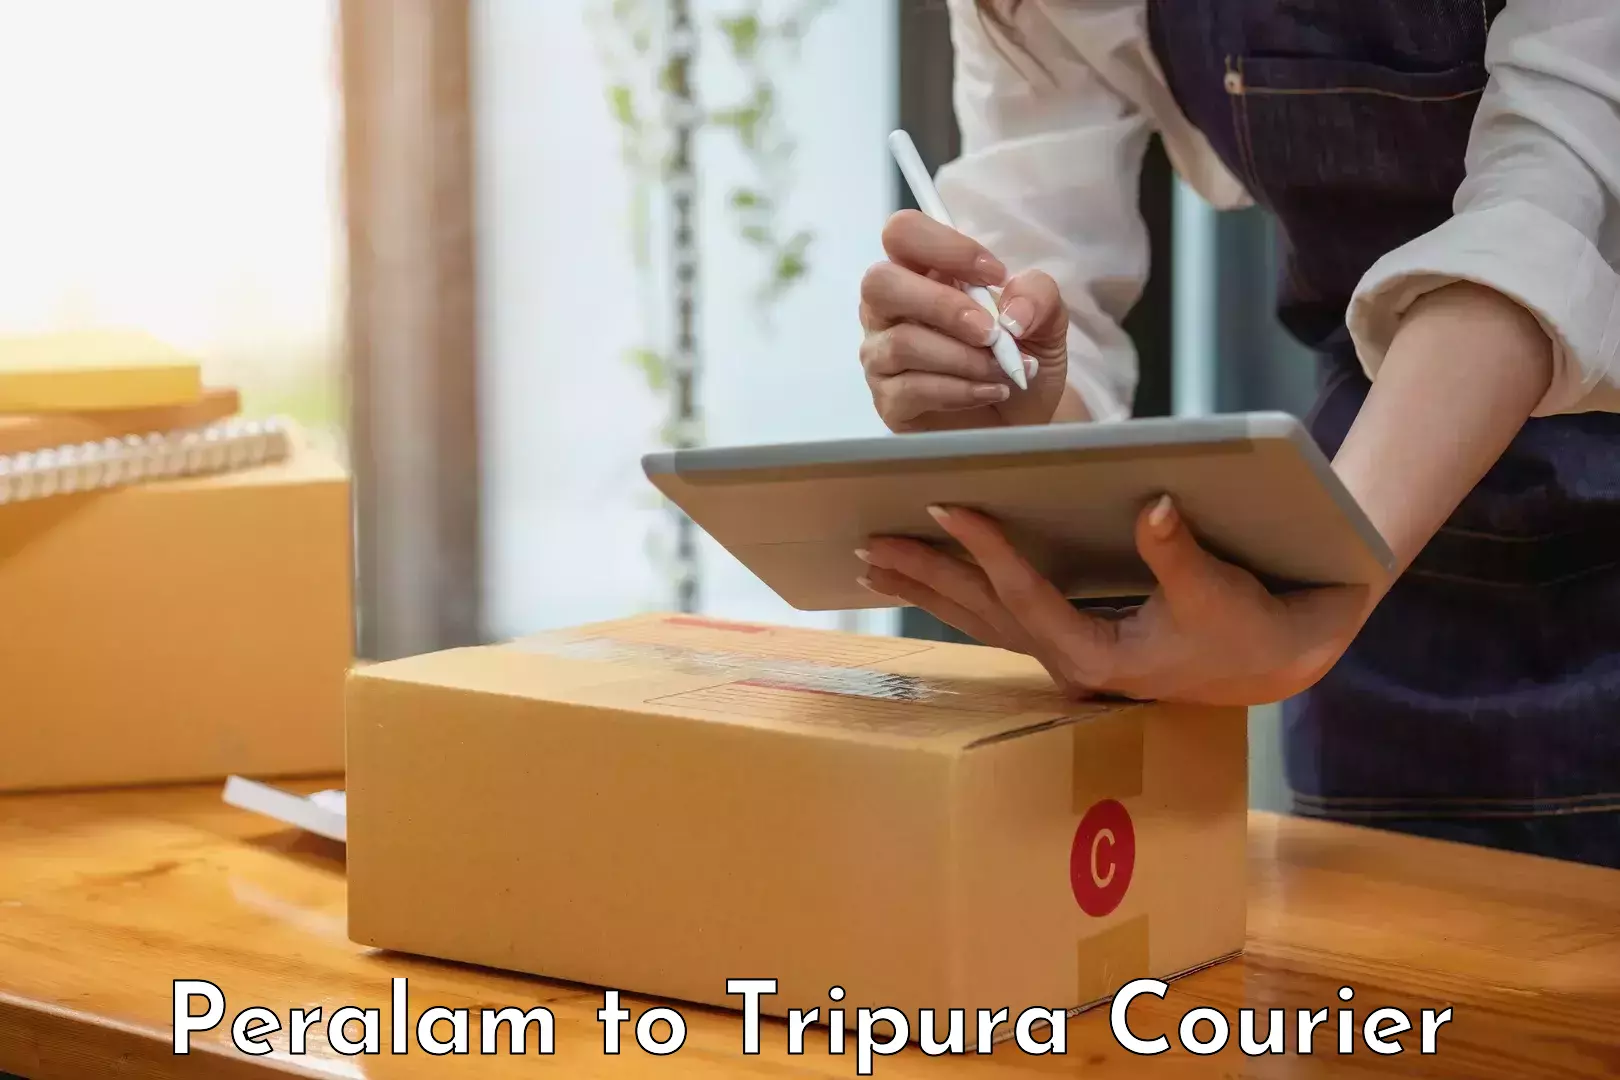 Modern courier technology Peralam to Udaipur Tripura